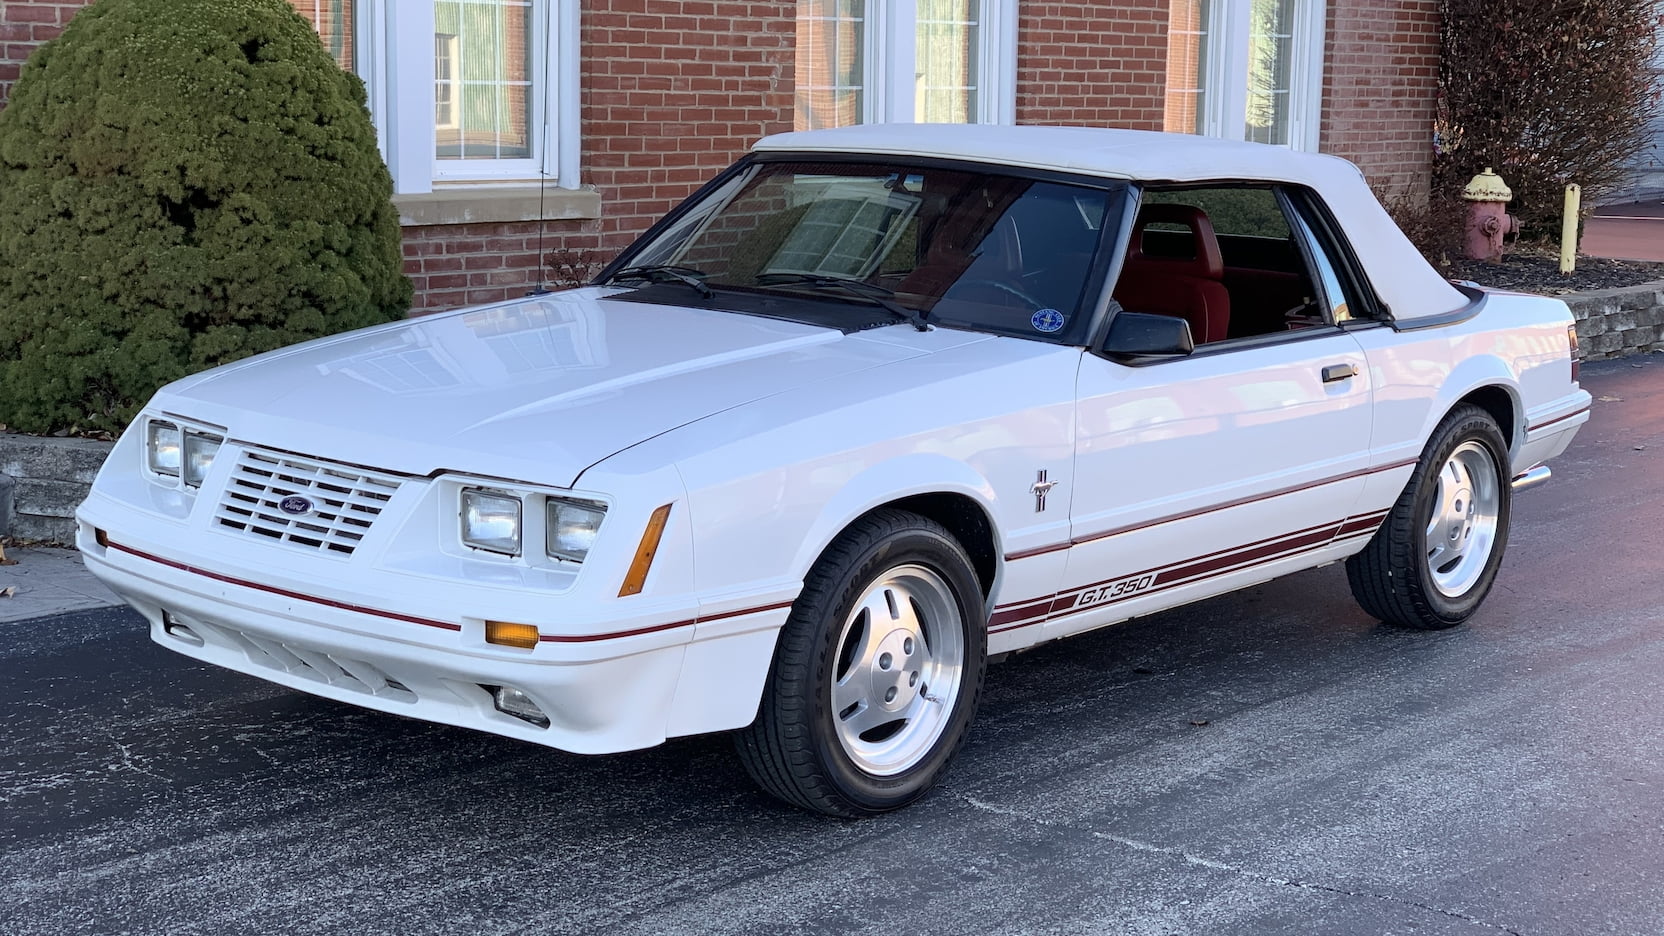 Mustang Of The Day: 1984 Ford Mustang Anniversary GT